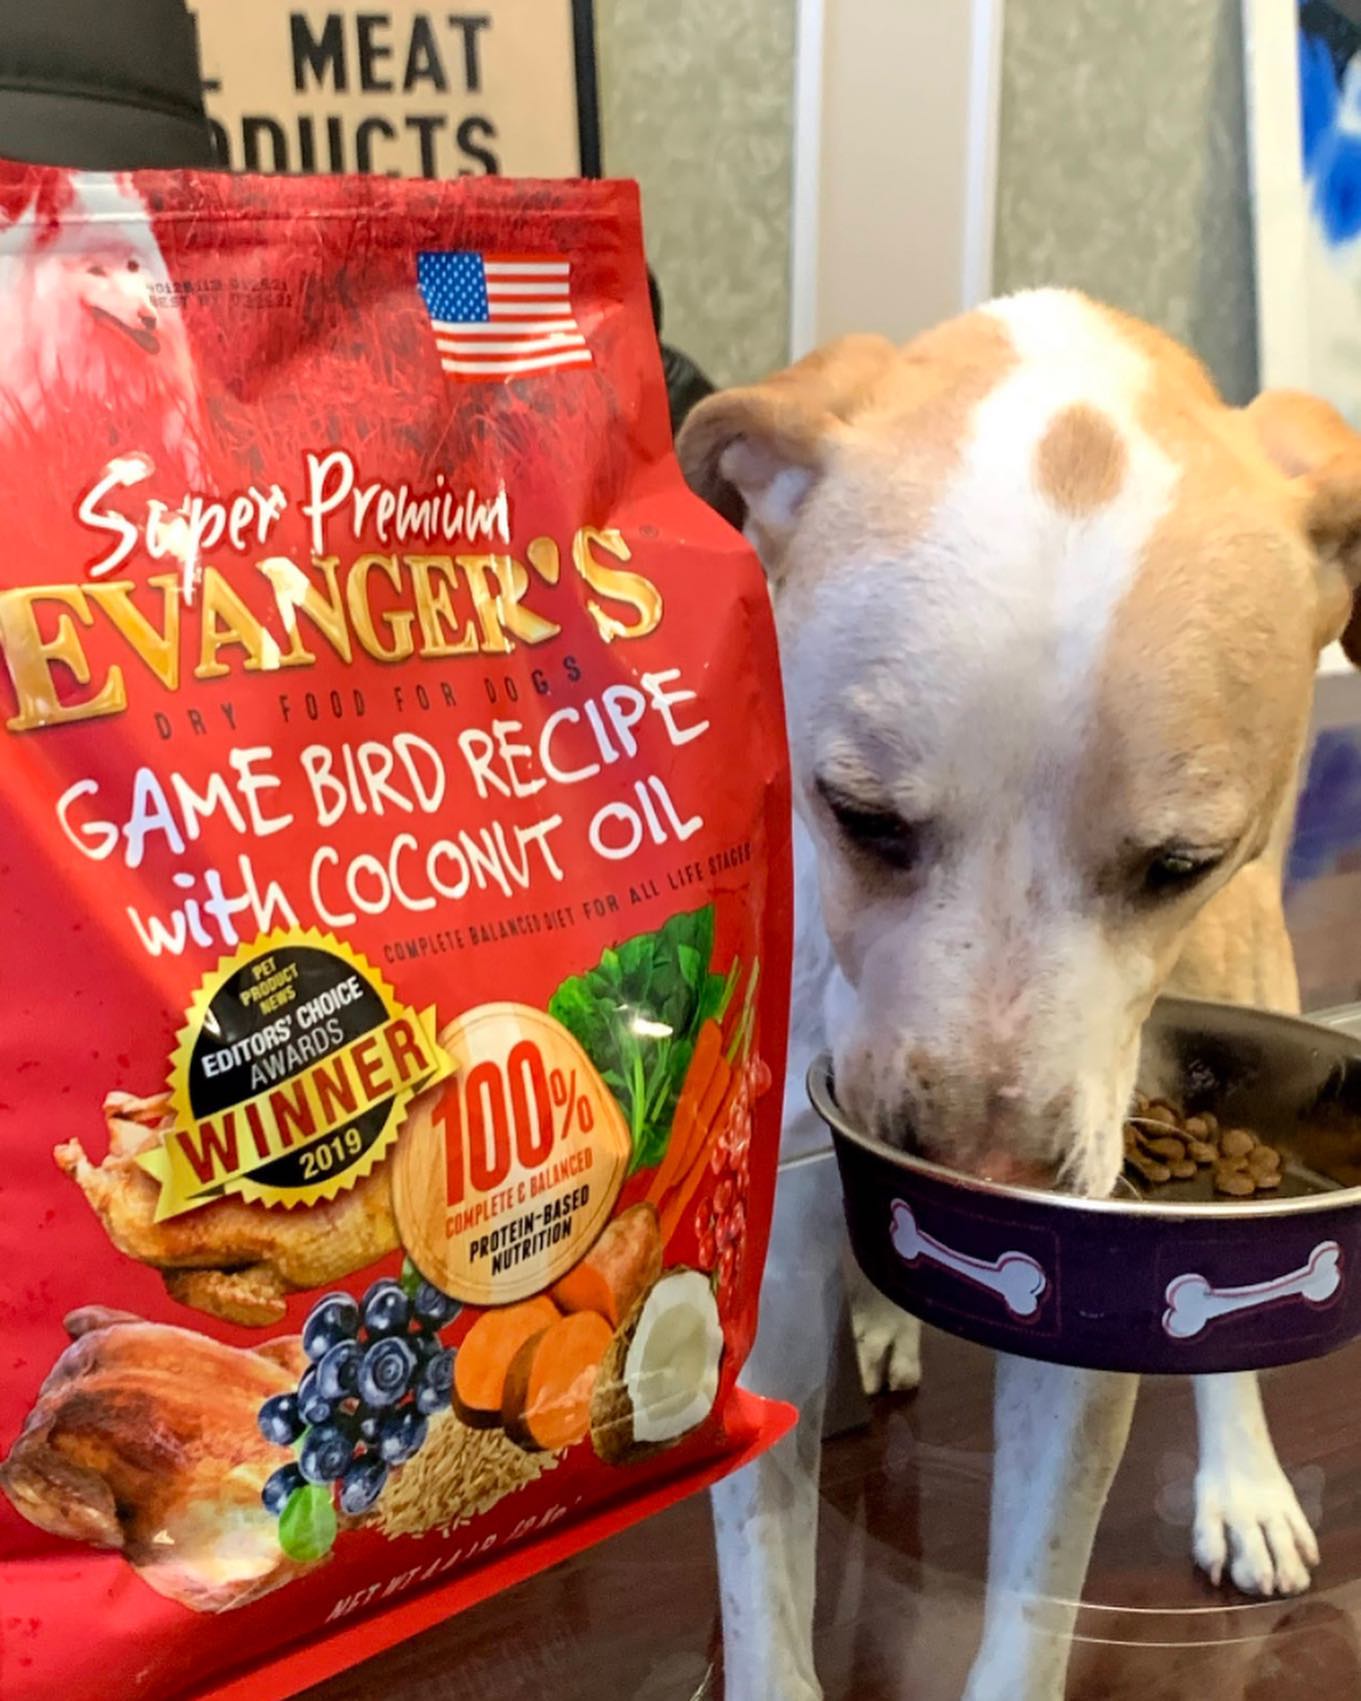 Evangers Gamebird Recipe With Coconut Oil , Dry Dog Food